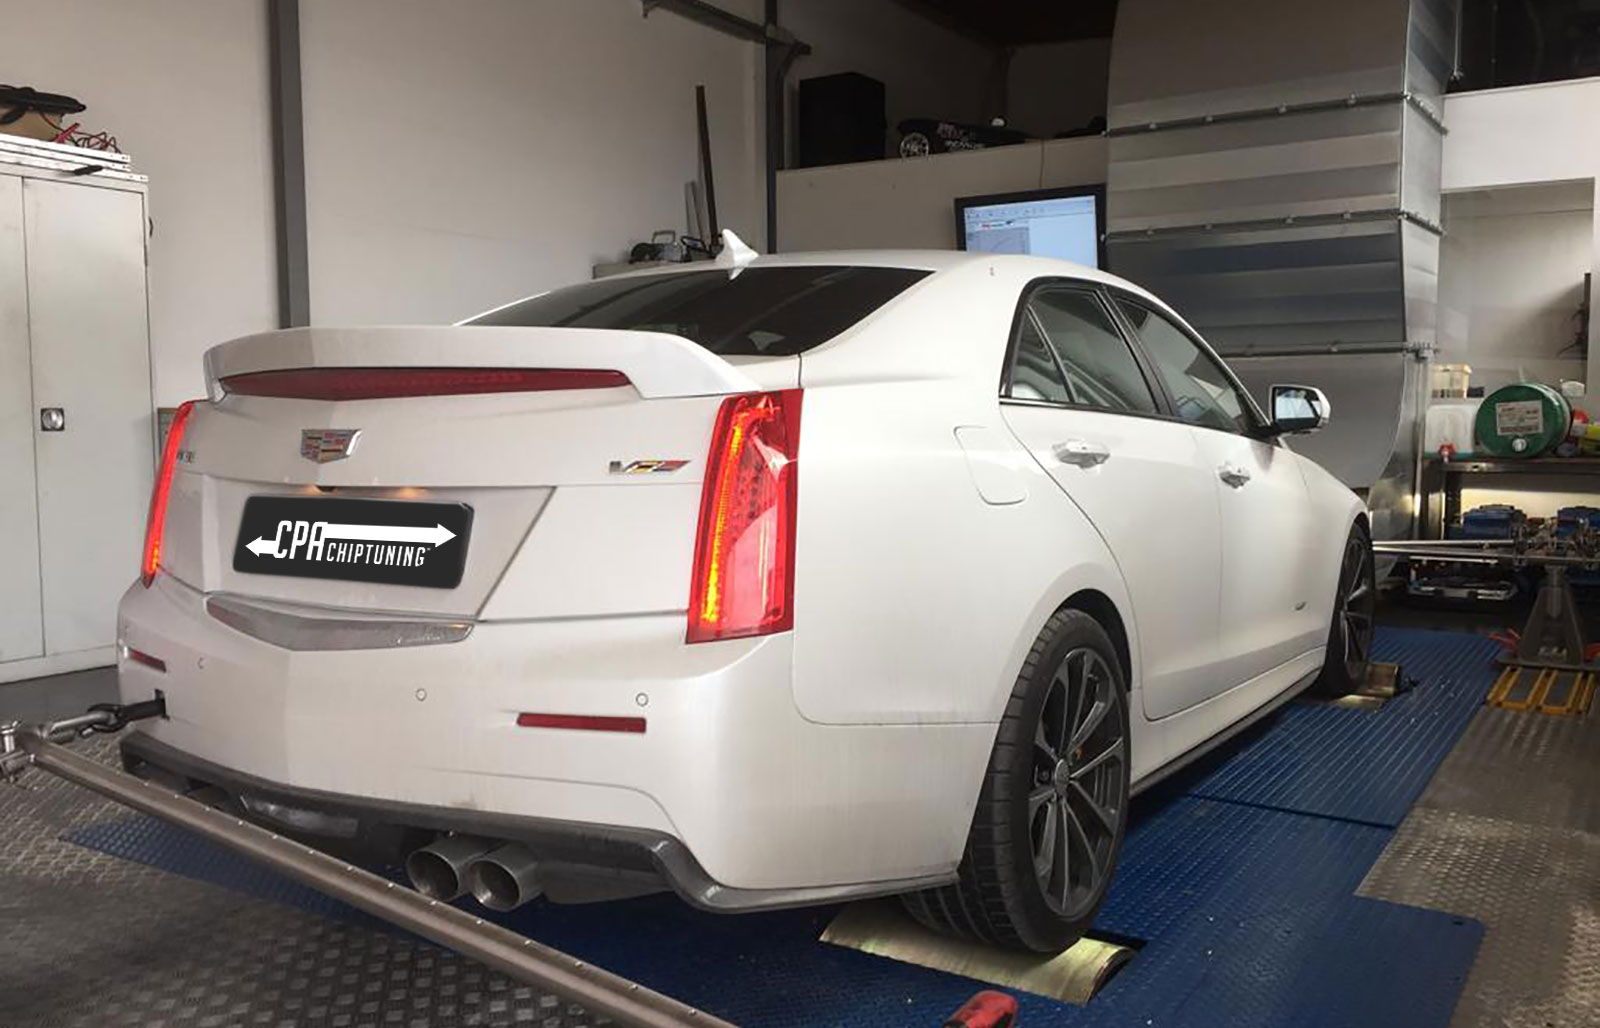 Power increase for the Cadillac ATS 3.6 V6 Twin Turbo